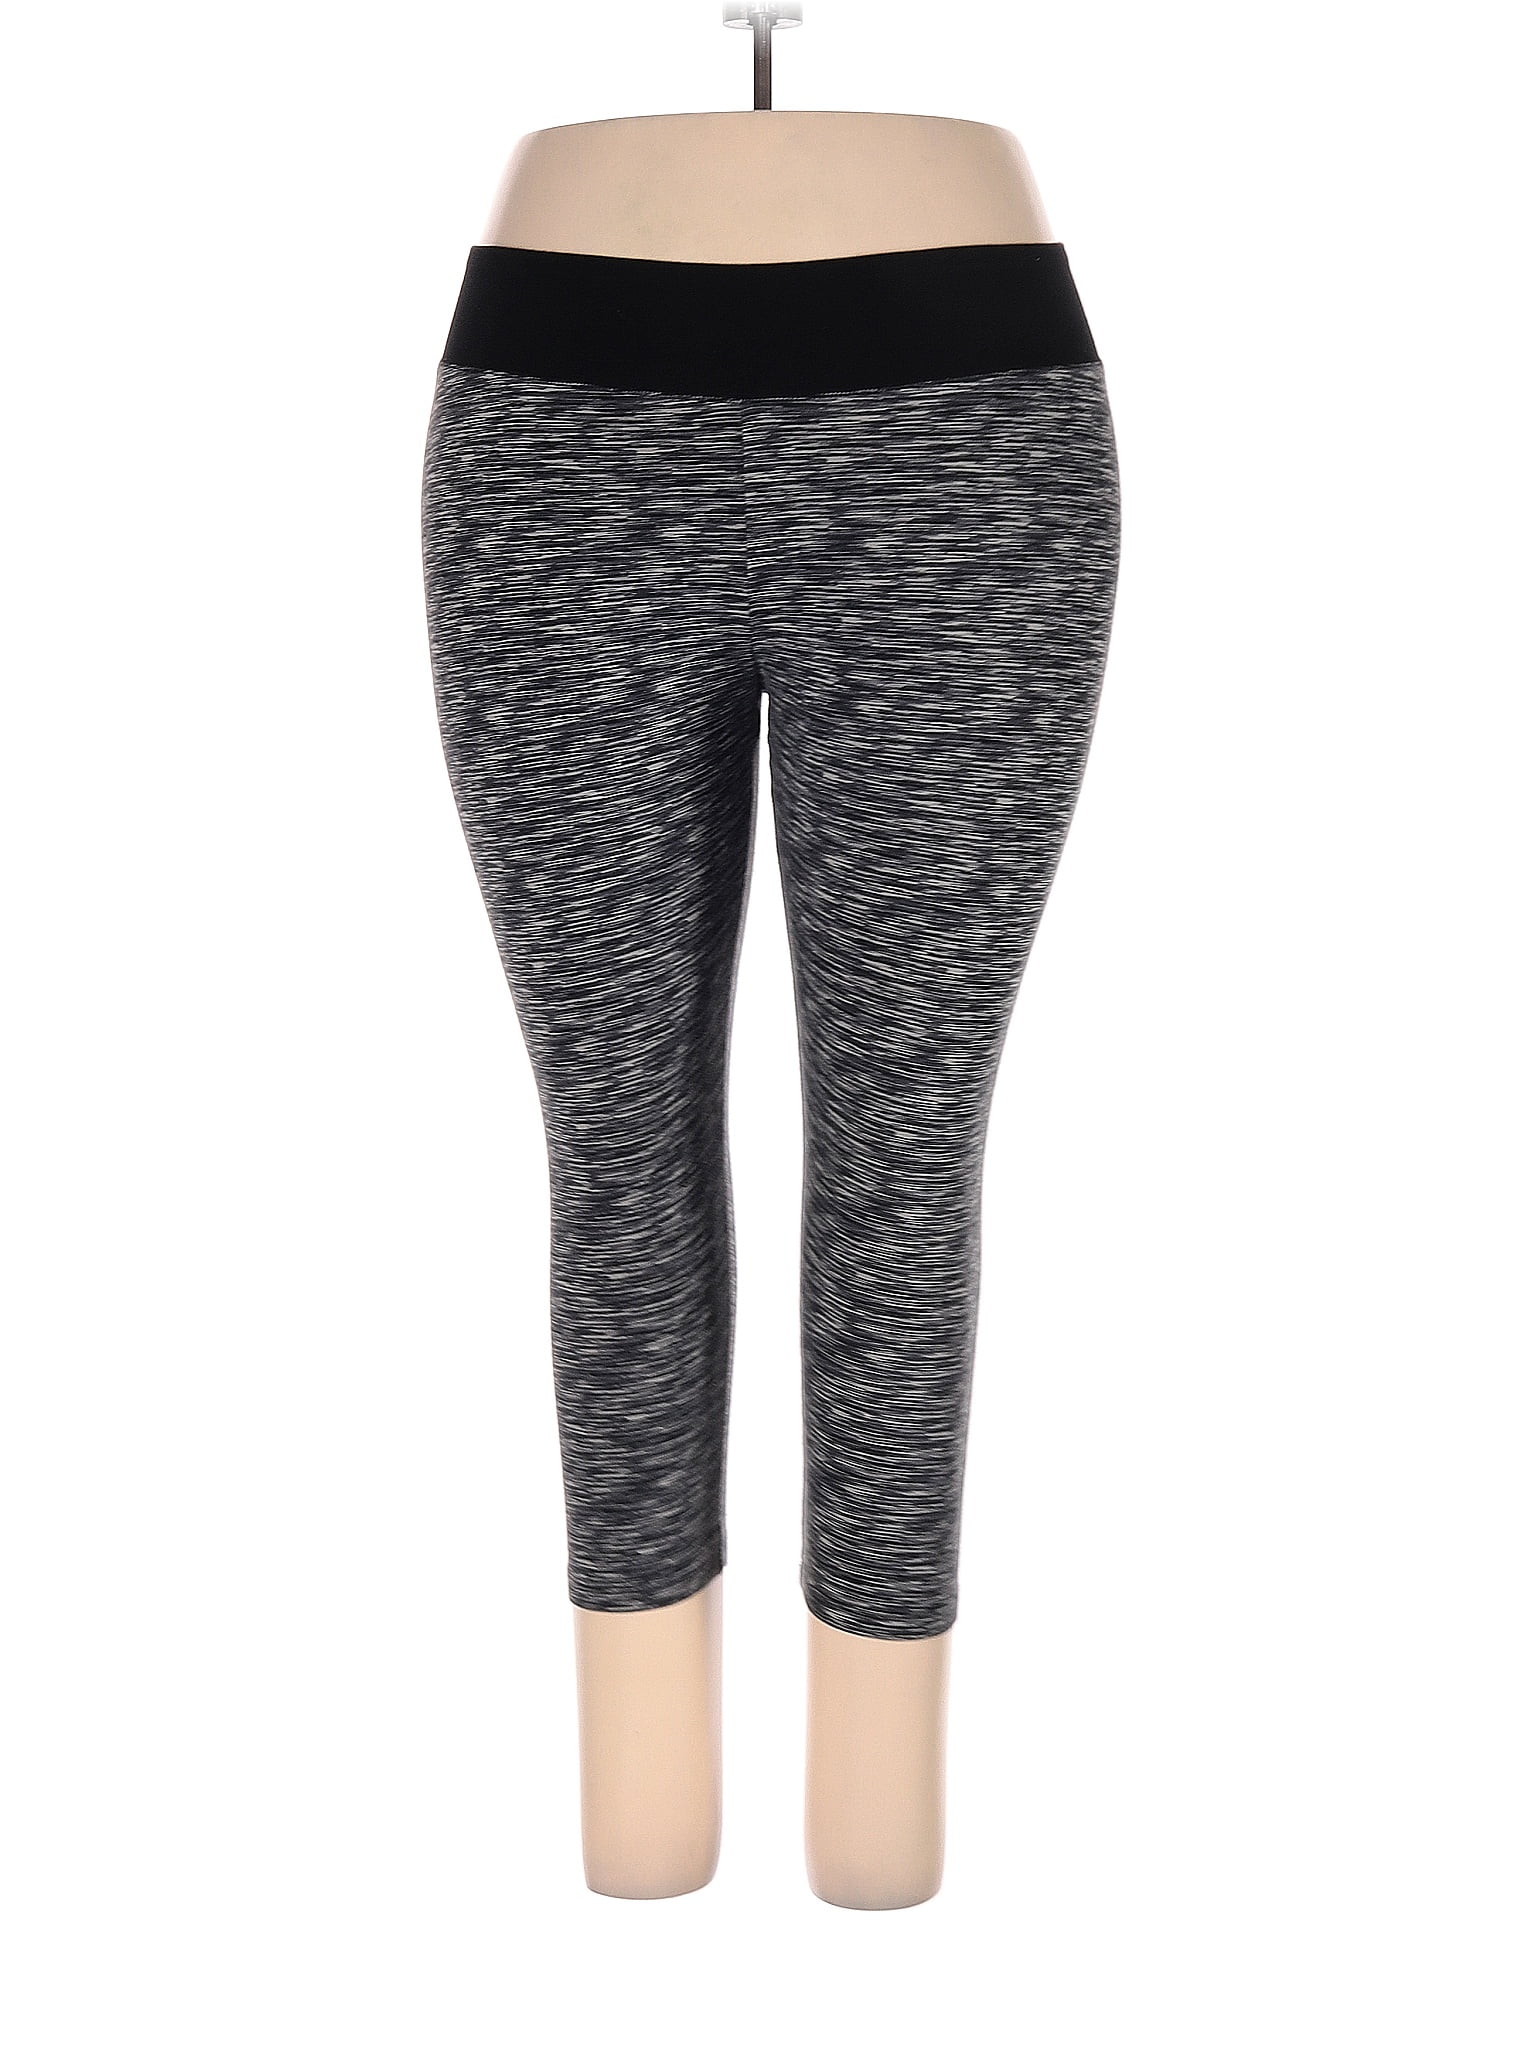 Flirtitude Juniors Pants On Sale Up To 90% Off Retail